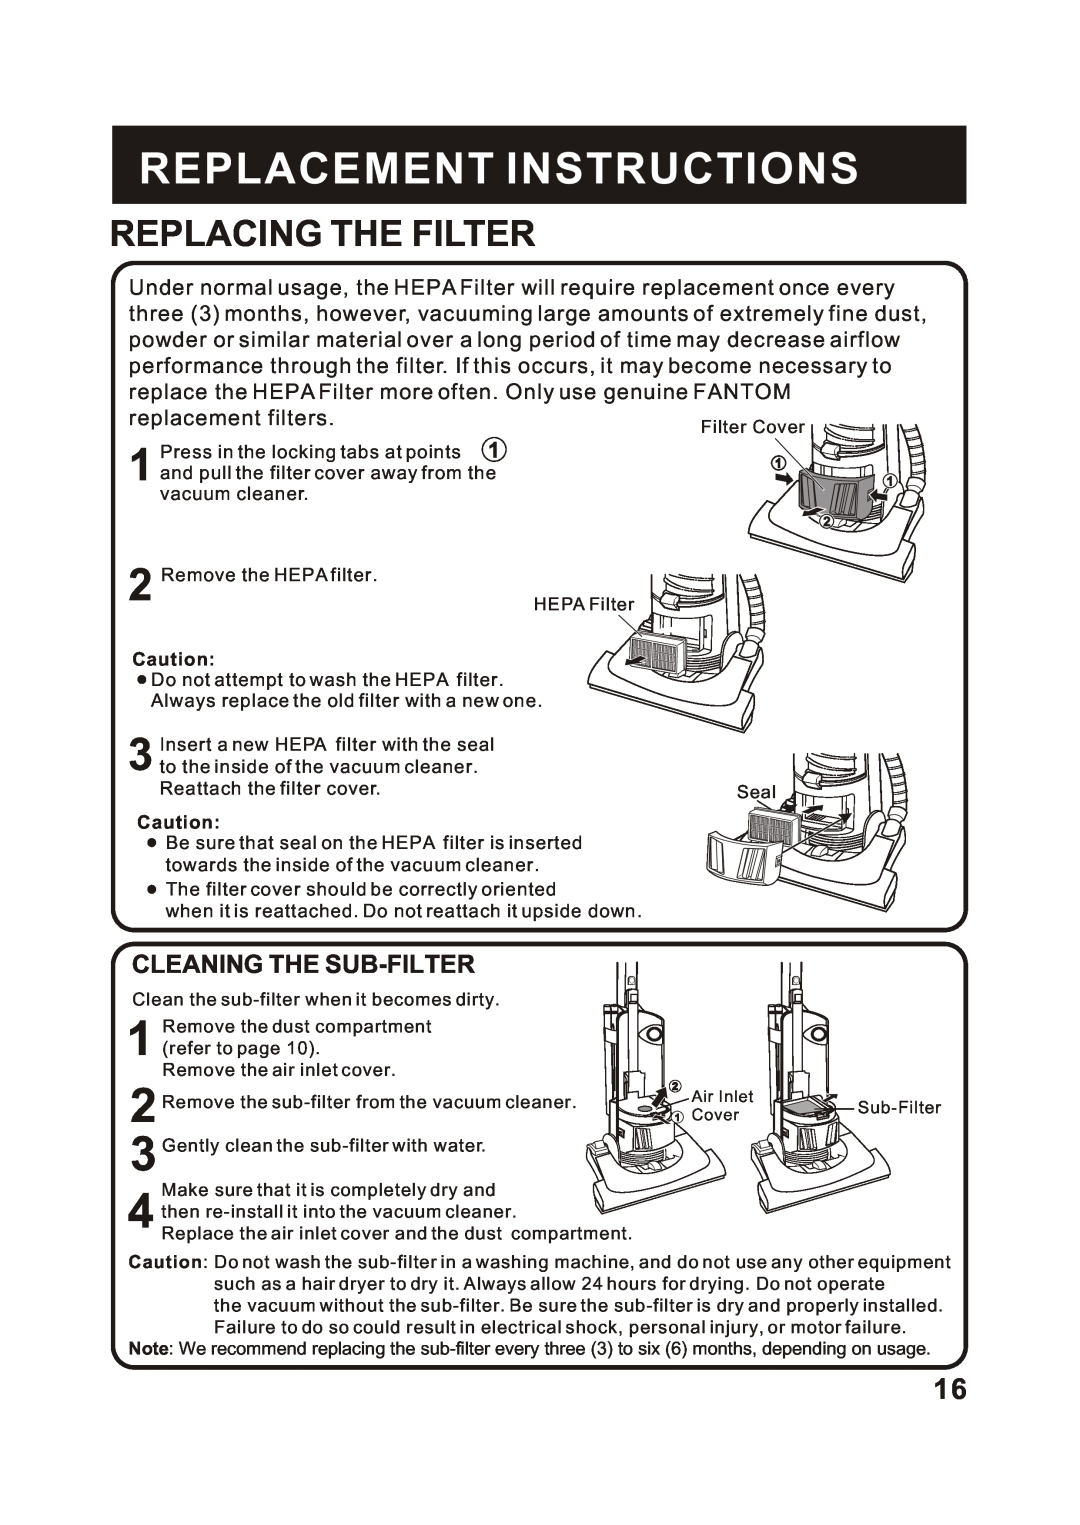 Fantom Vacuum FM788HC, FM788HG, FM788HB Replacing The Filter, Cleaning The Sub-Filter, Replacement Instructions 